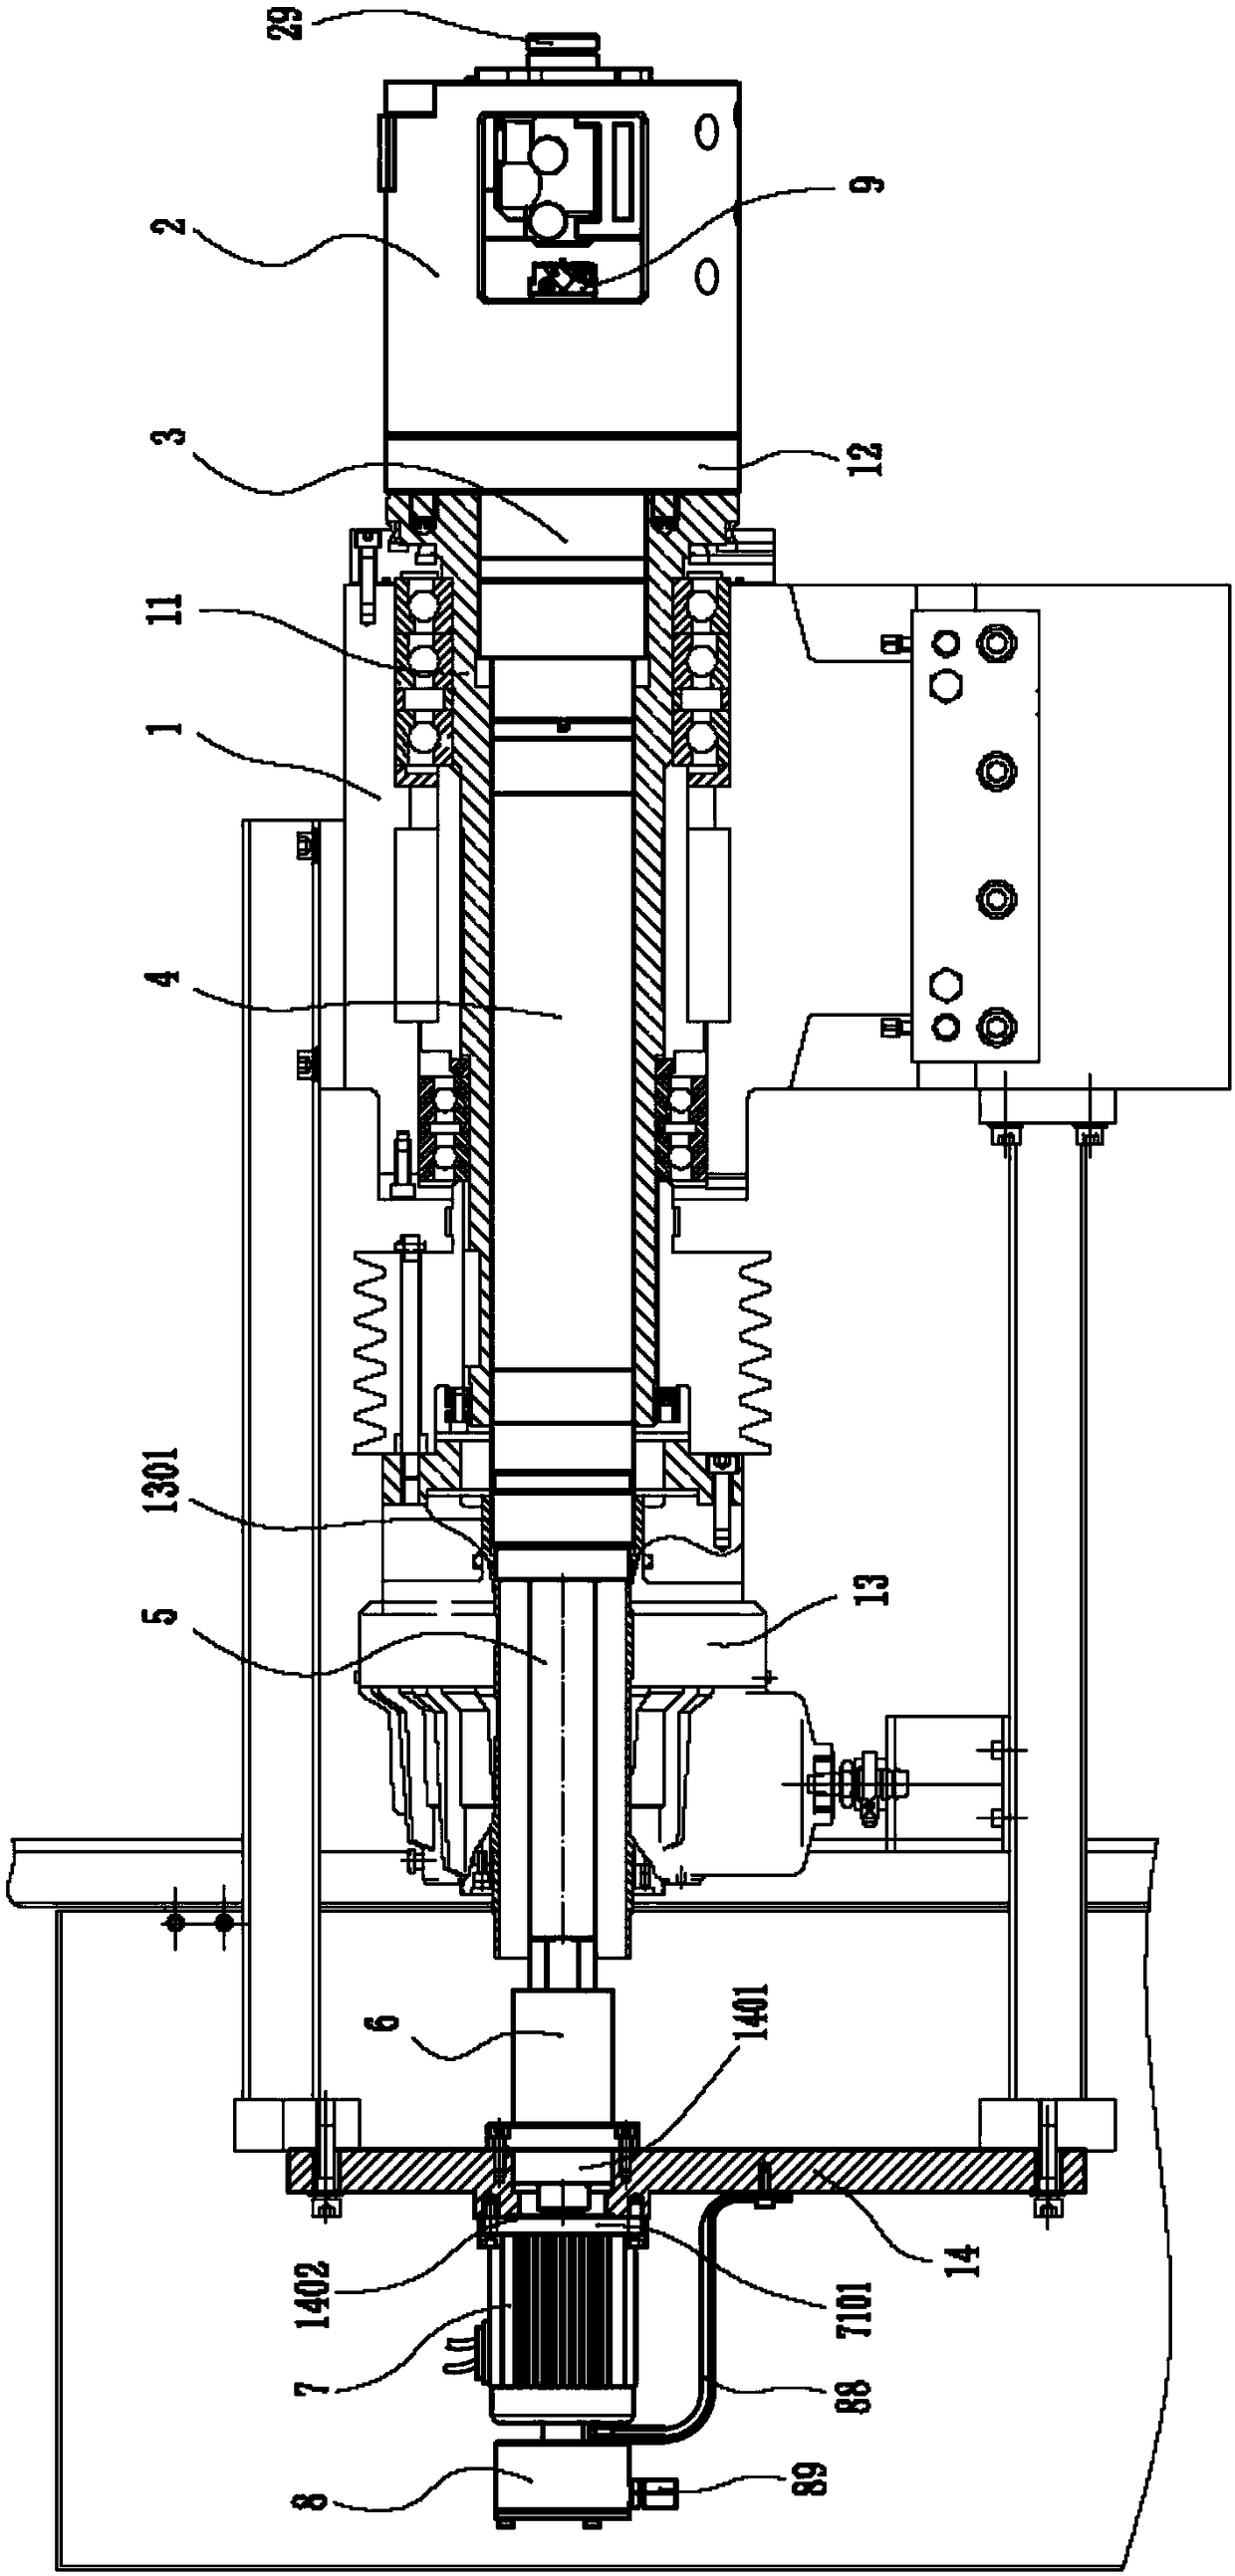 Numerically controlled lathe spindle drilling device